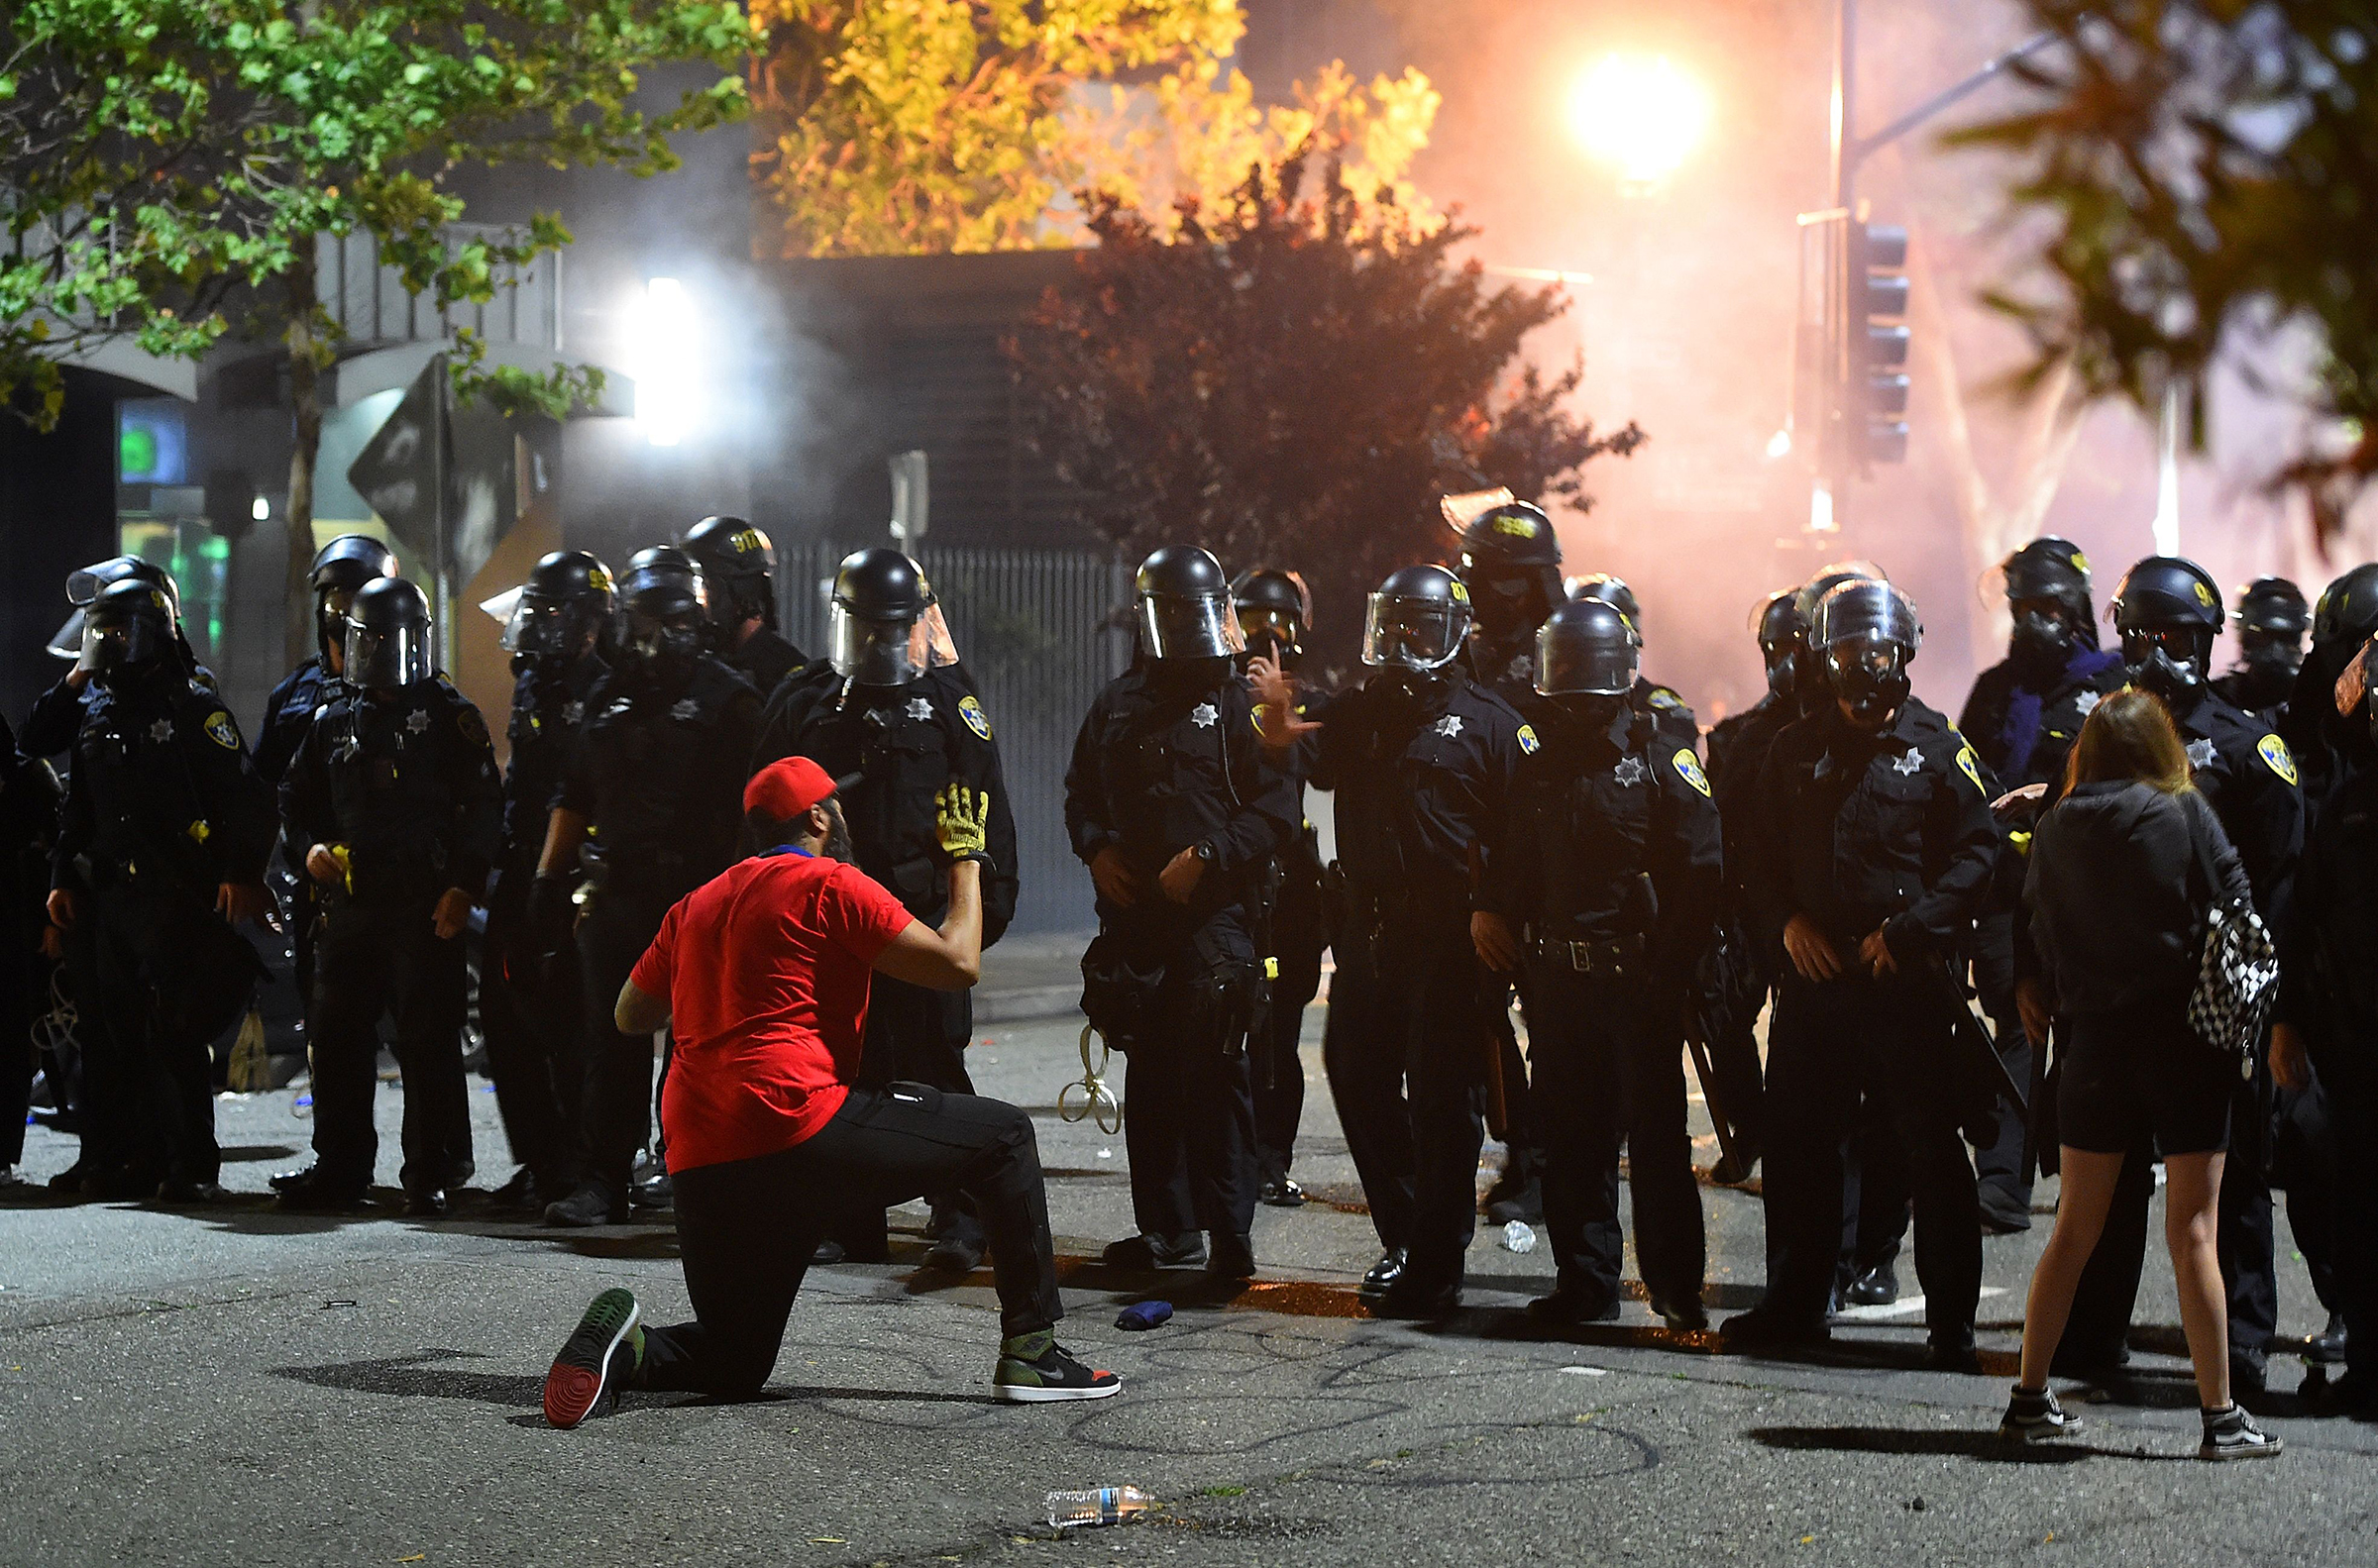 A man kneels in front of a police skirmish line in Oakland California on May 29, 2020. (Josh Edelson—AFP via Getty Images)